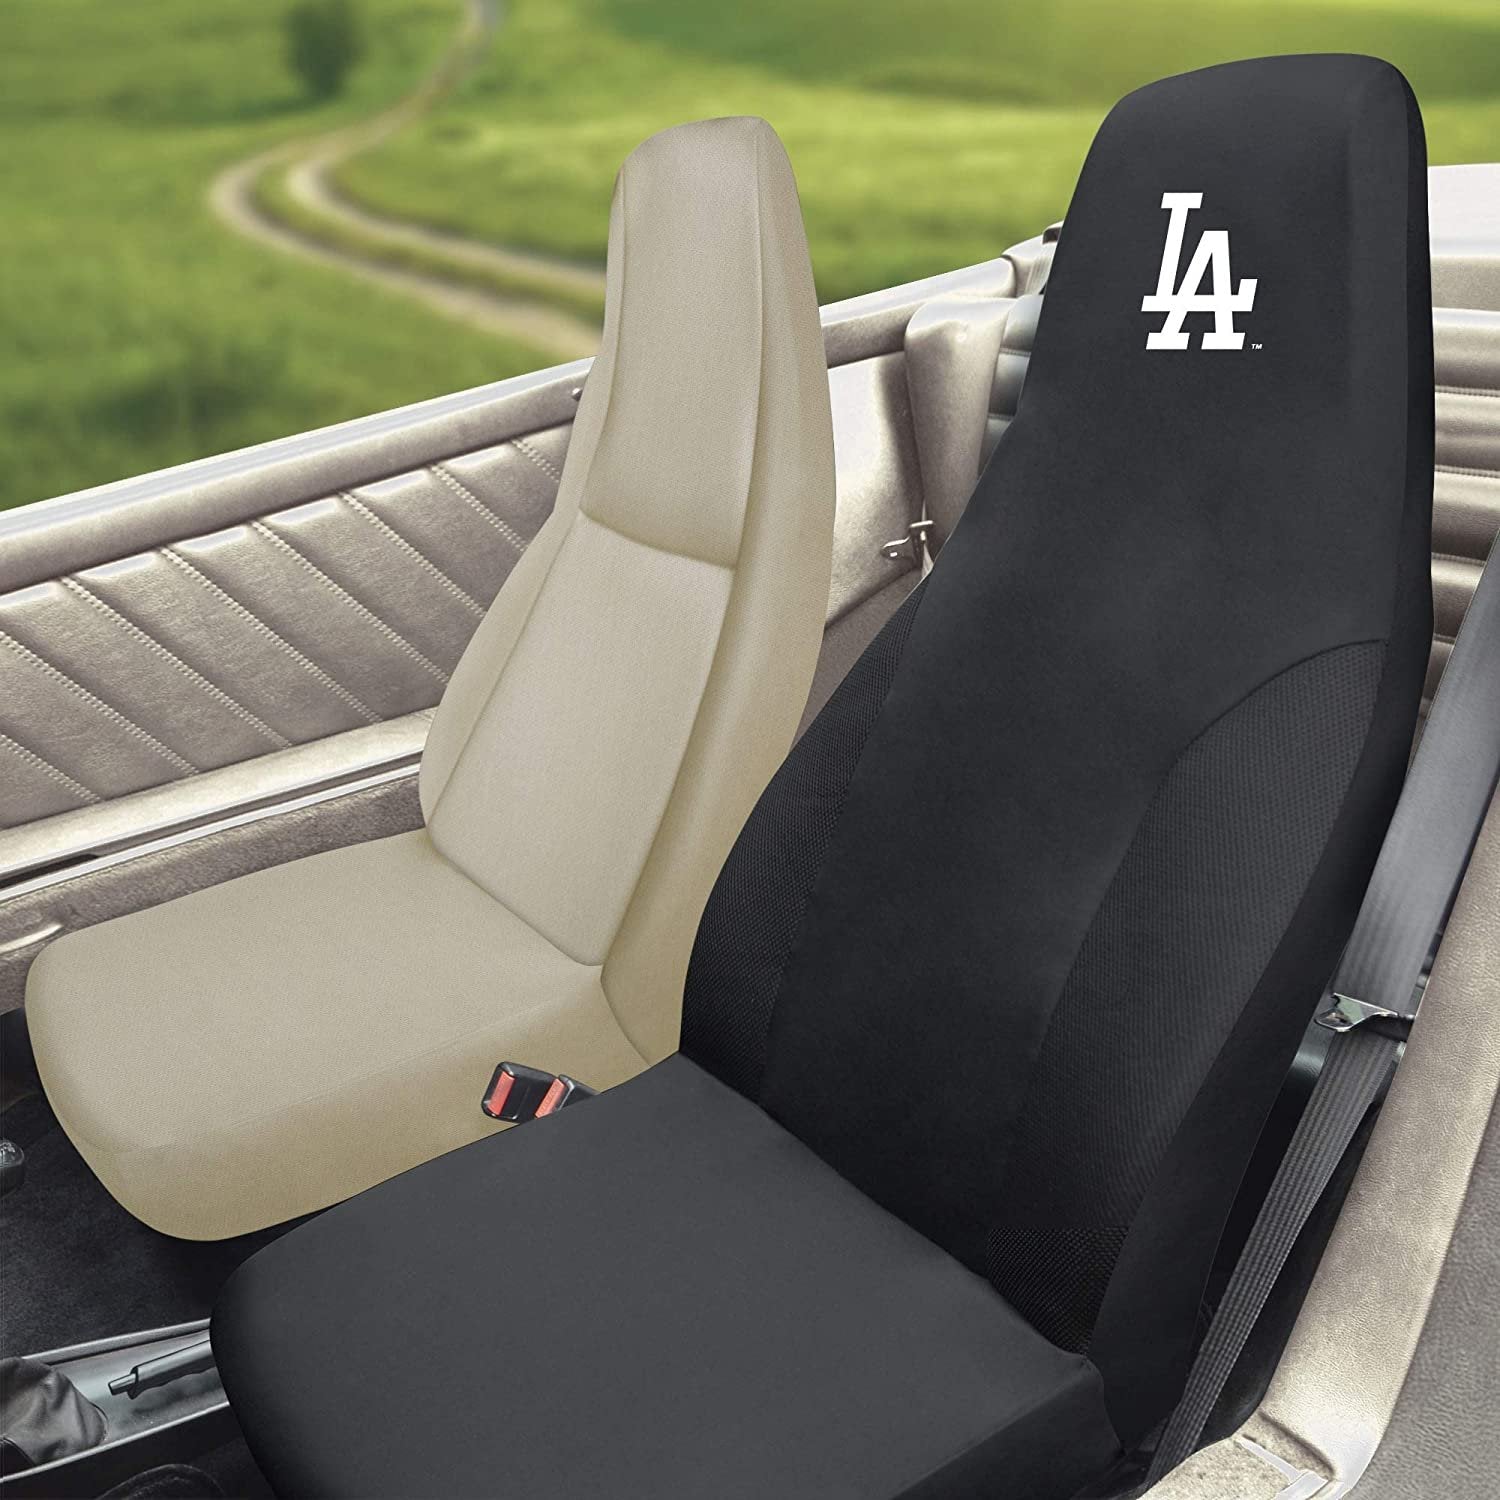 FANMATS 26620 MLB - Los Angeles Dodgers Seat Cover